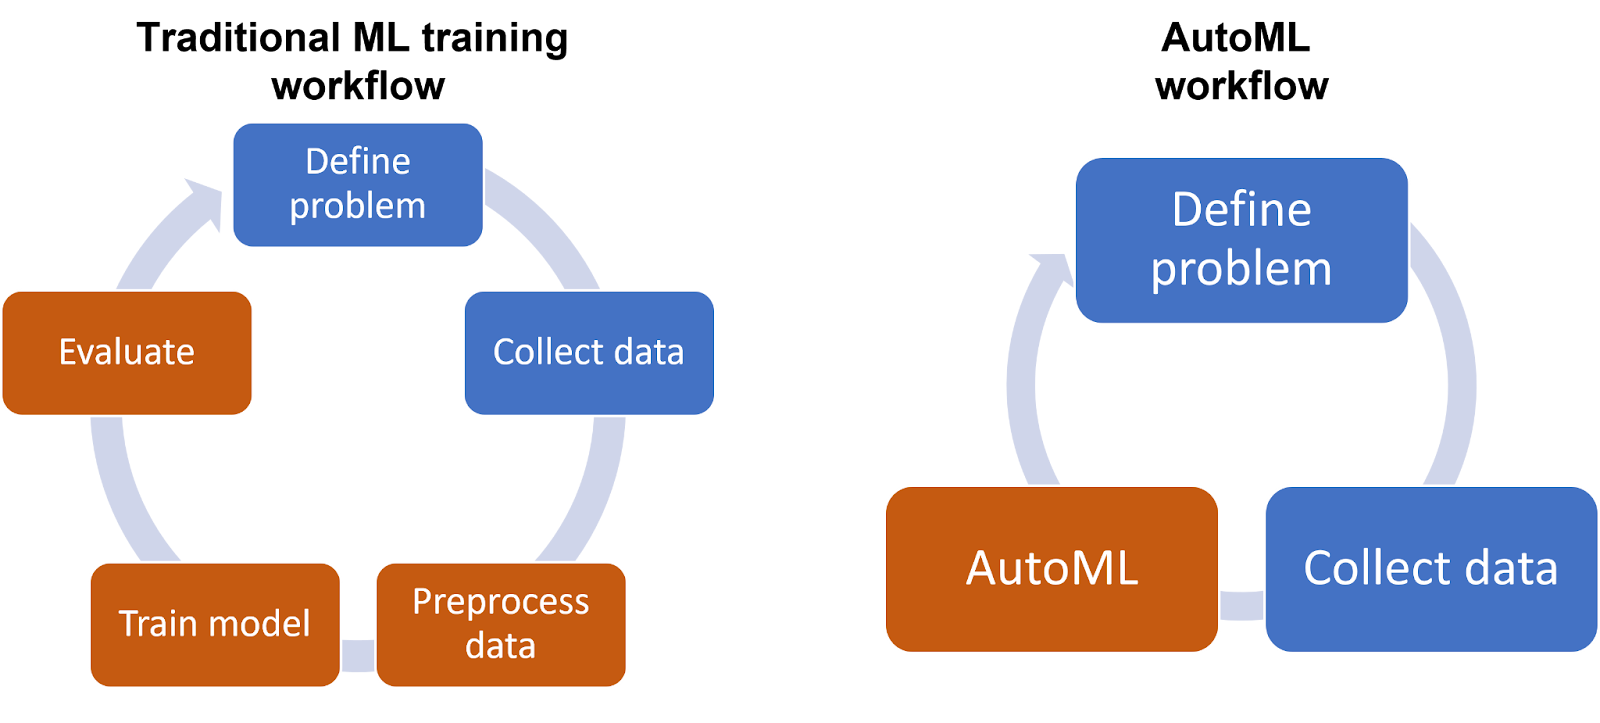 What are the key trends in AutoML, and how are they simplifying machine learning model development? 2